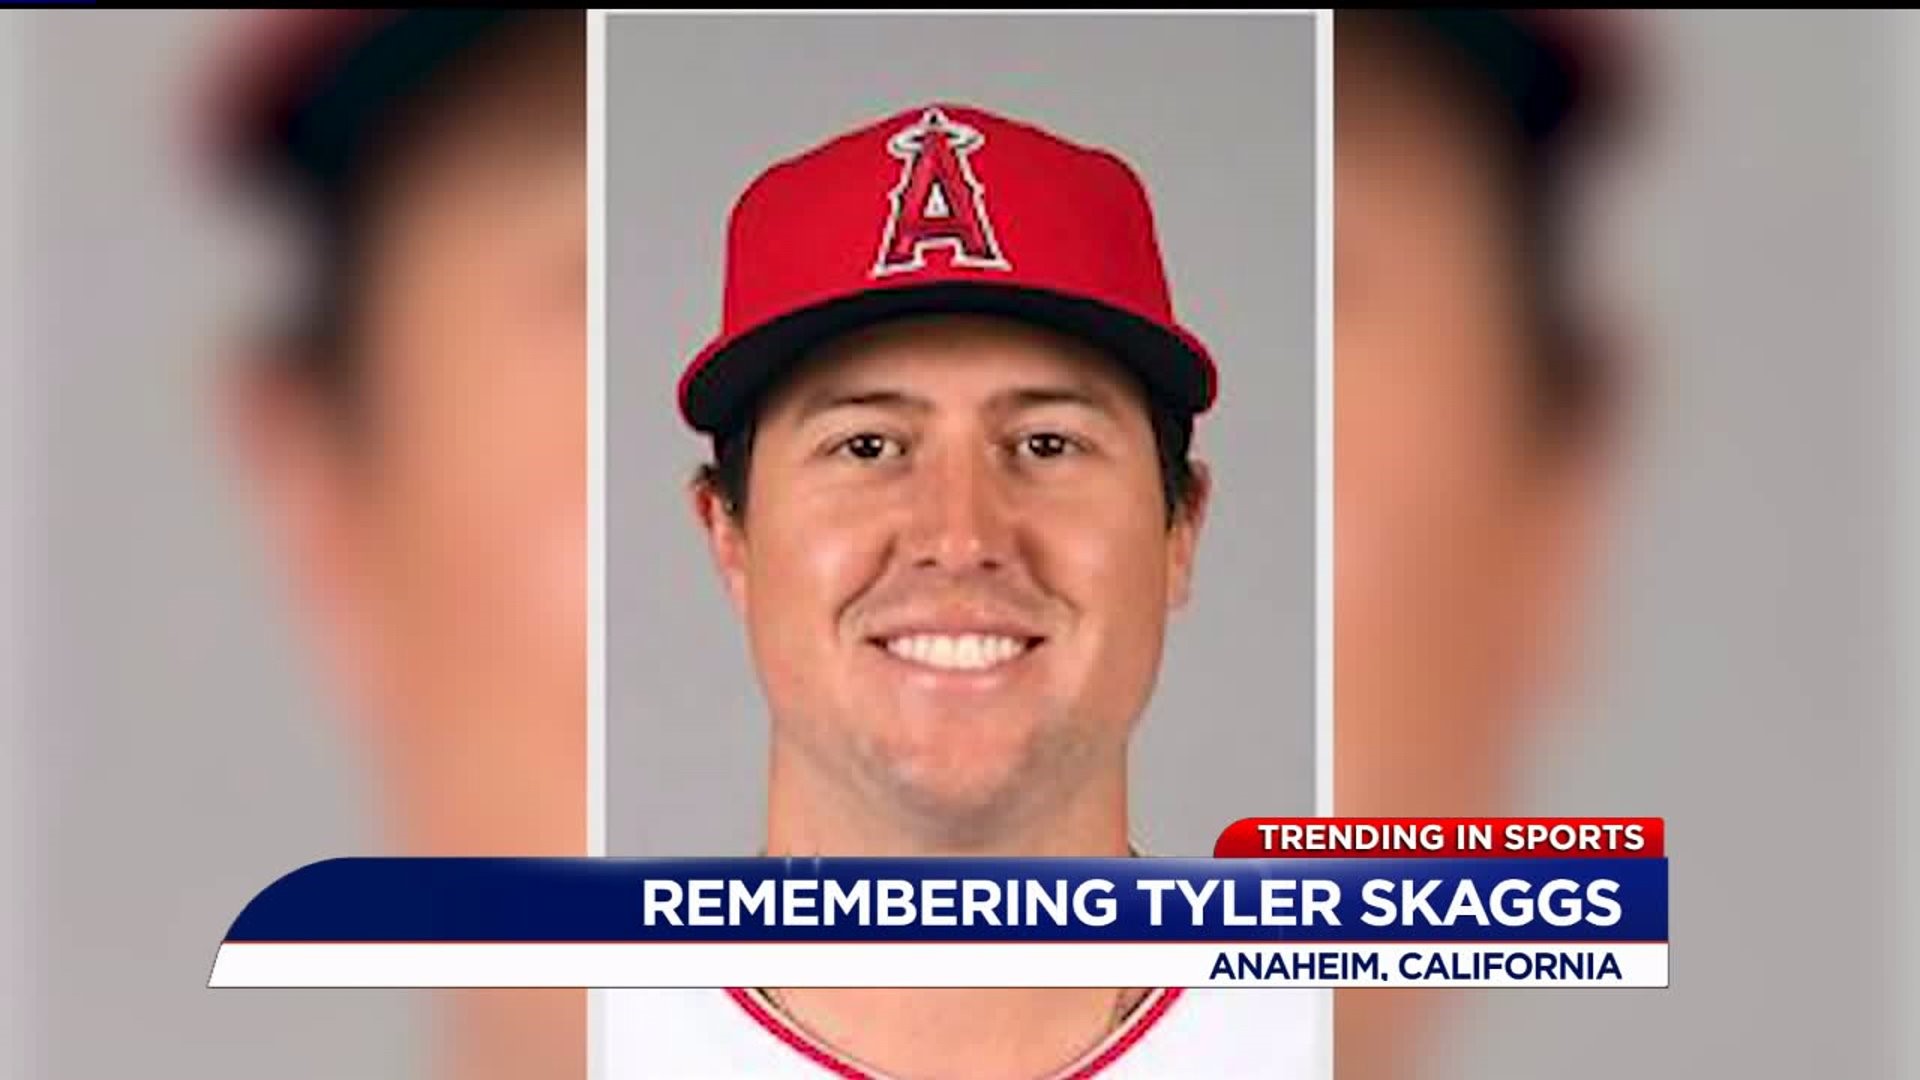 Los Angeles Angels pitcher Tyler Skaggs has died